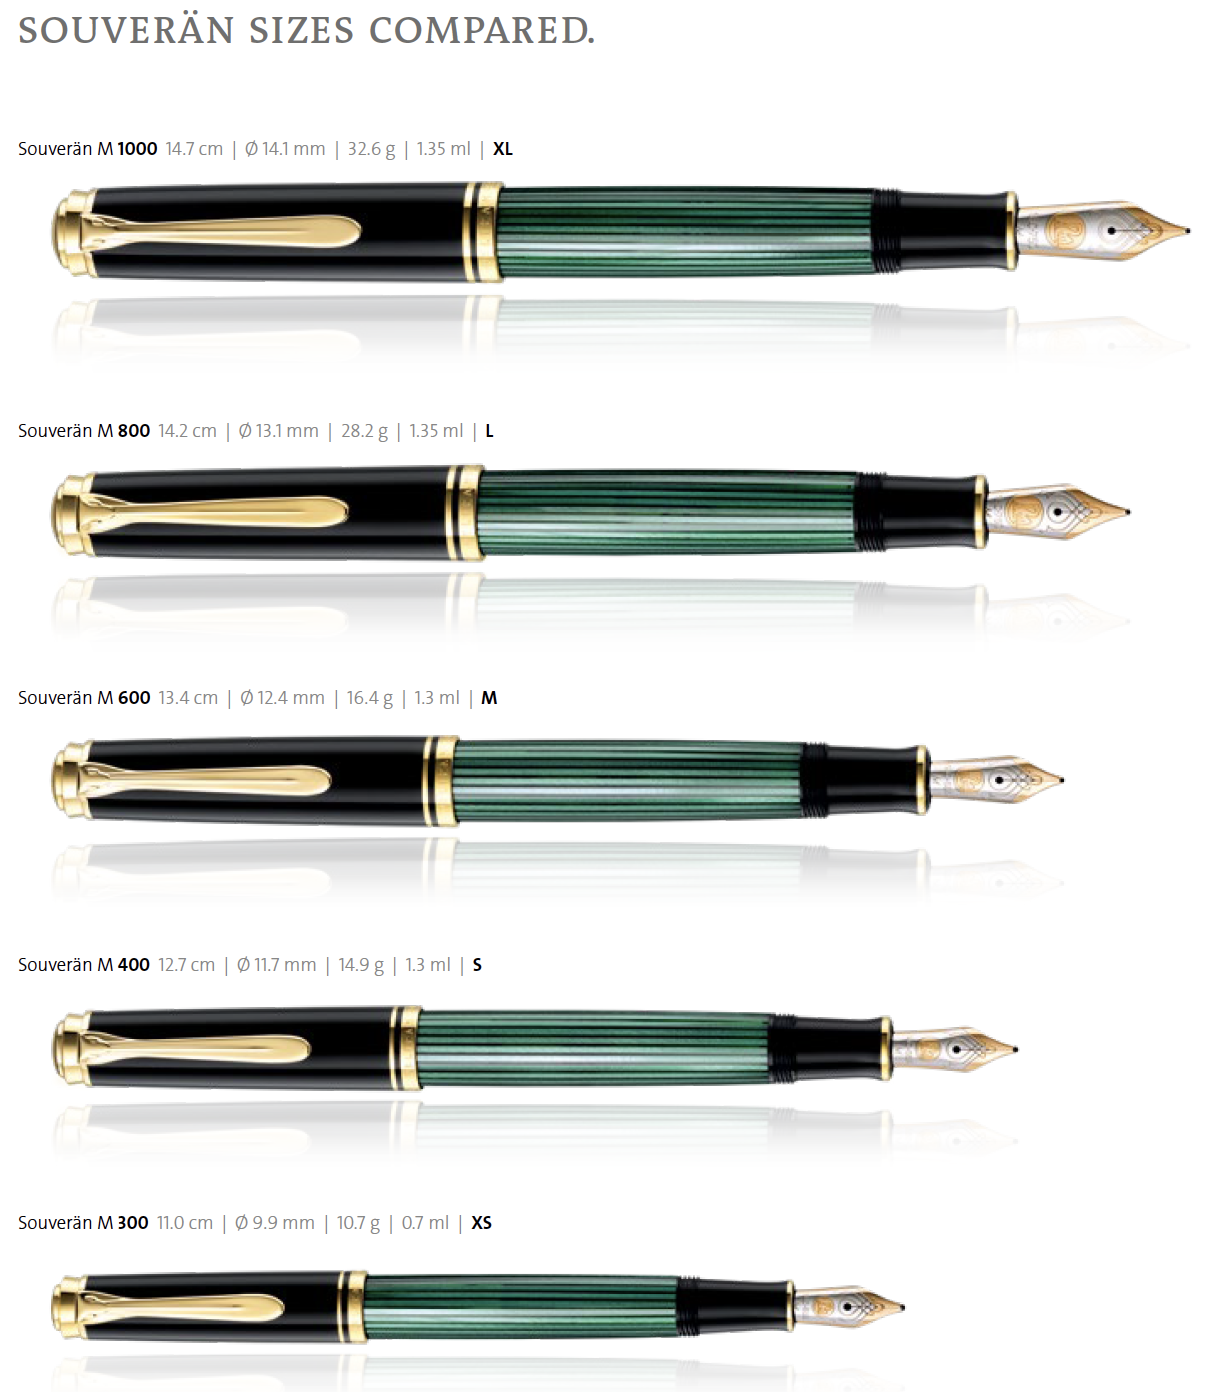 welzijn Concessie Gewend The Life And Death Of The Souverän M300 | The Pelikan's Perch